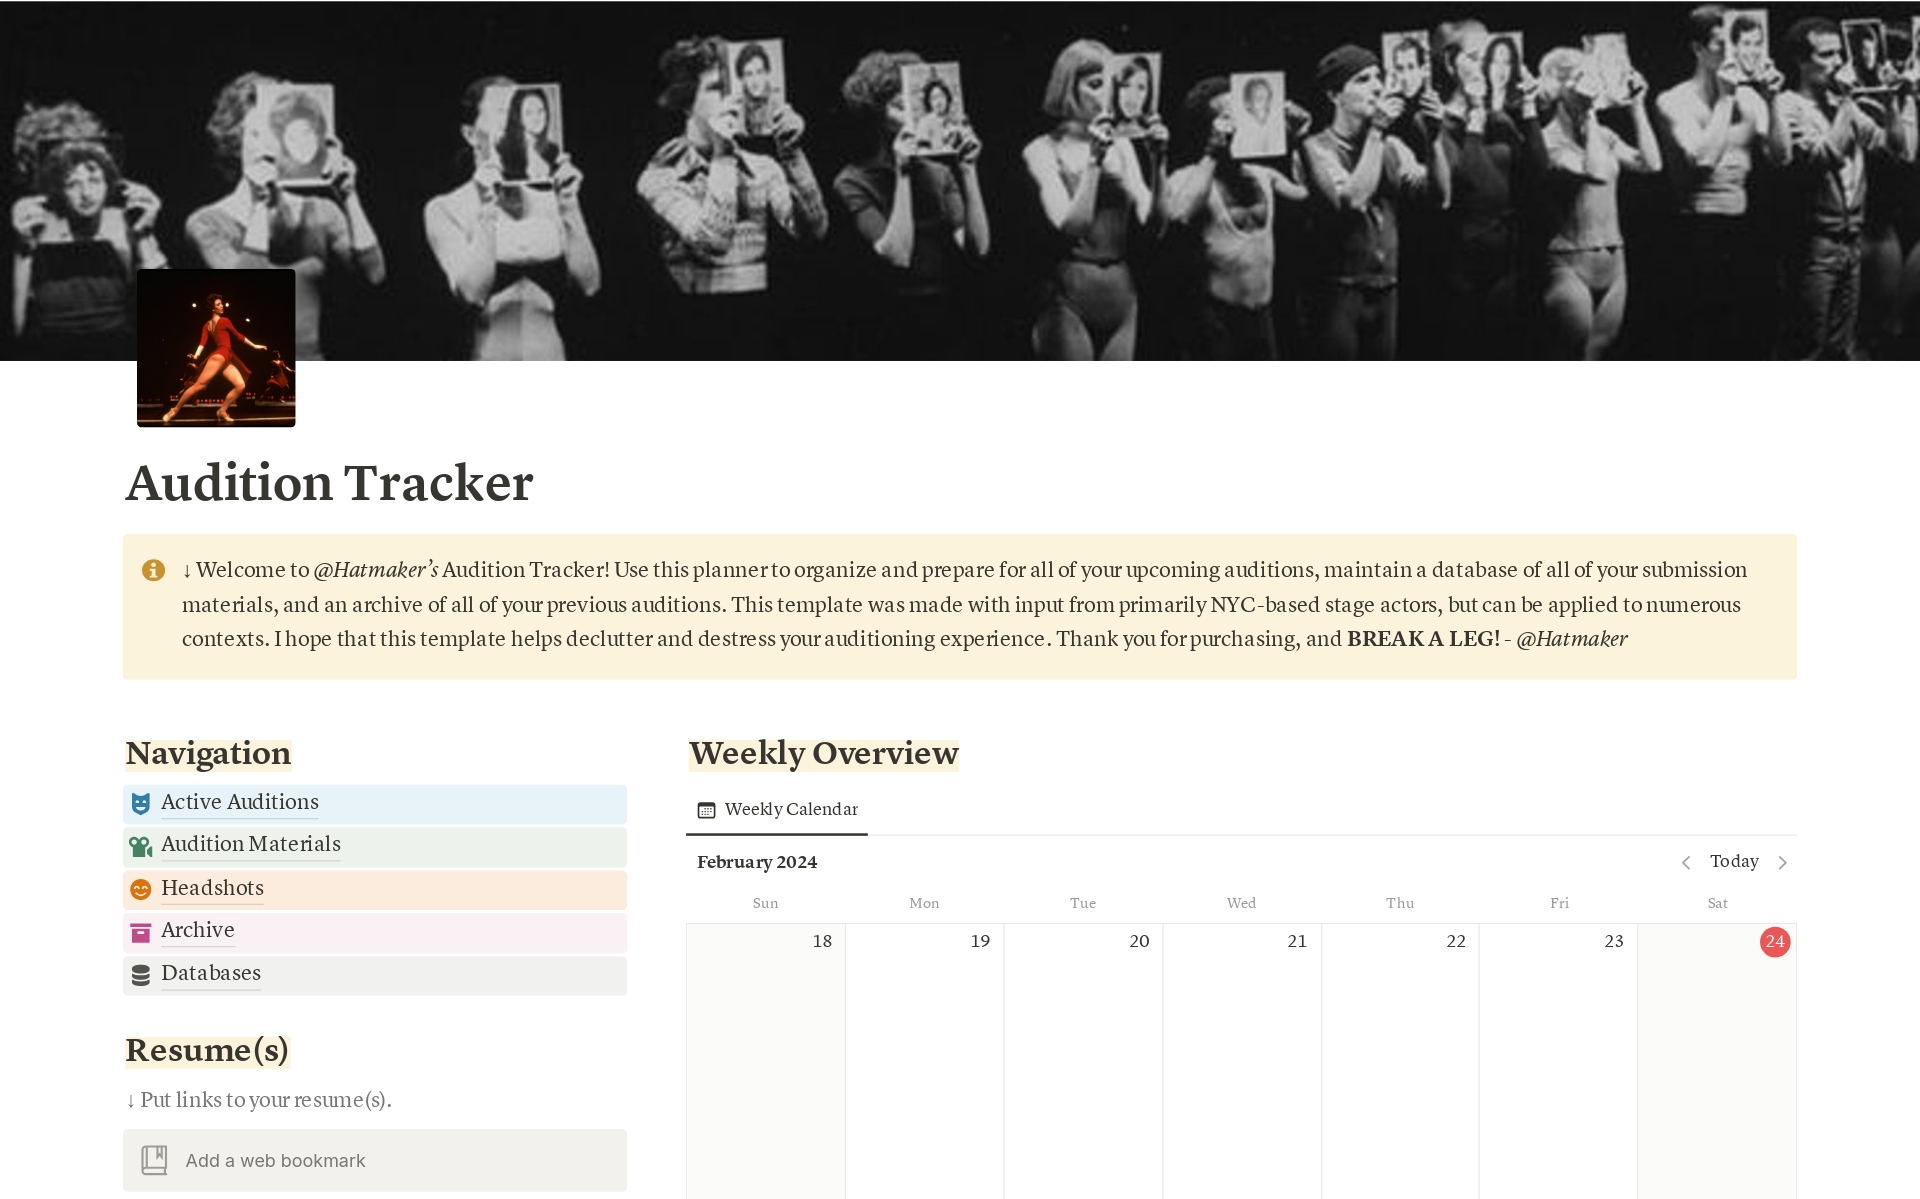 This template allows professional actors to track, organize, and plan every aspect of your current and upcoming auditions to ensure you can put your best foot forward while auditioning.